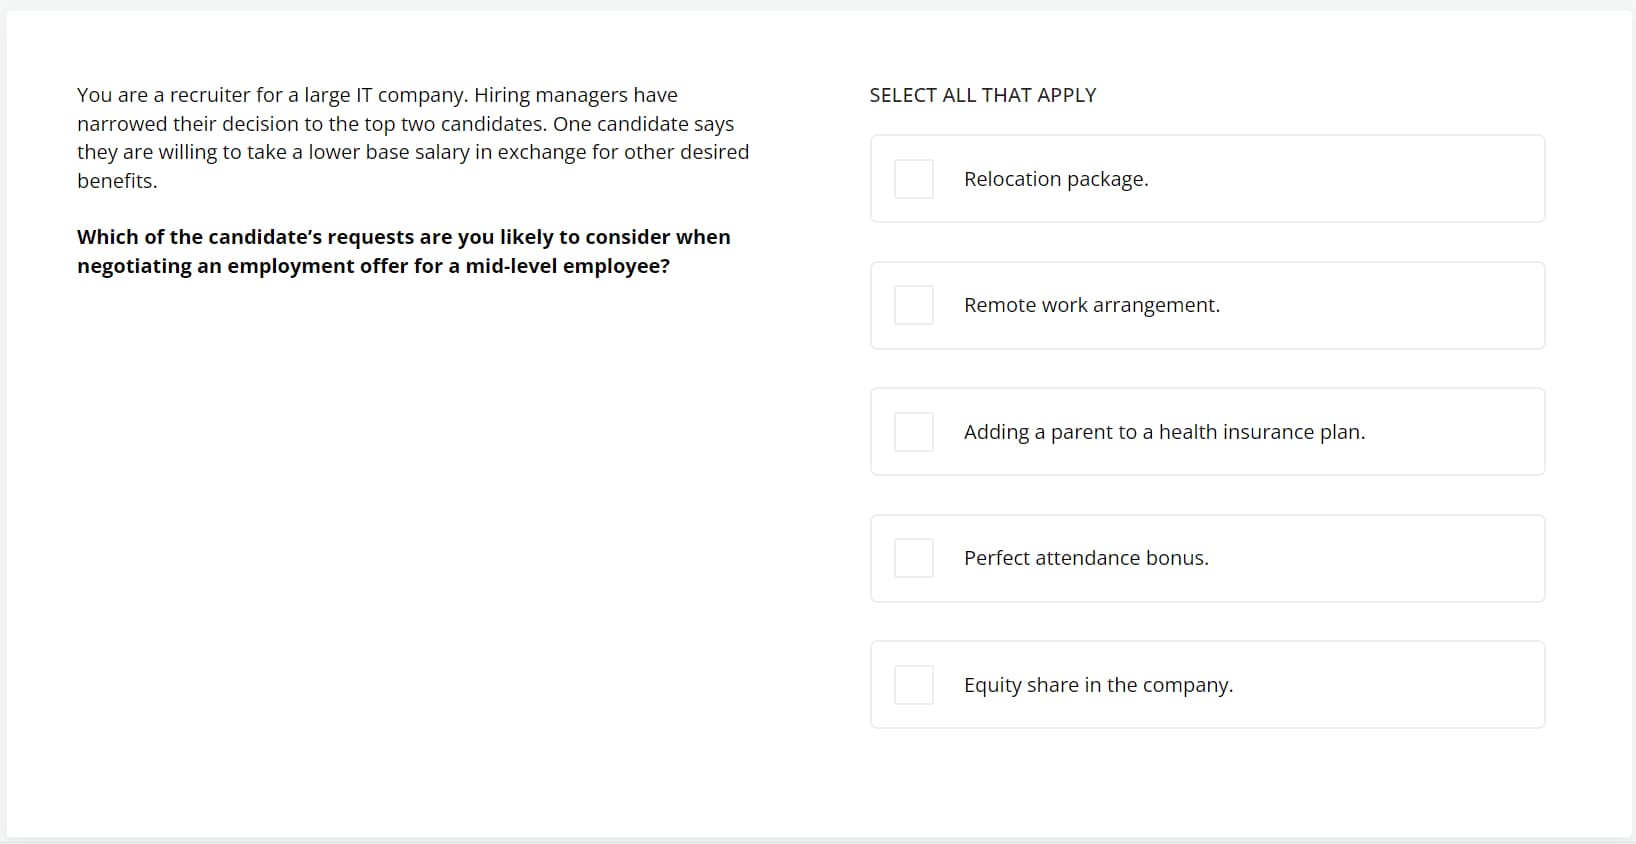 A preview question from TestGorilla's Leadership & People Management test